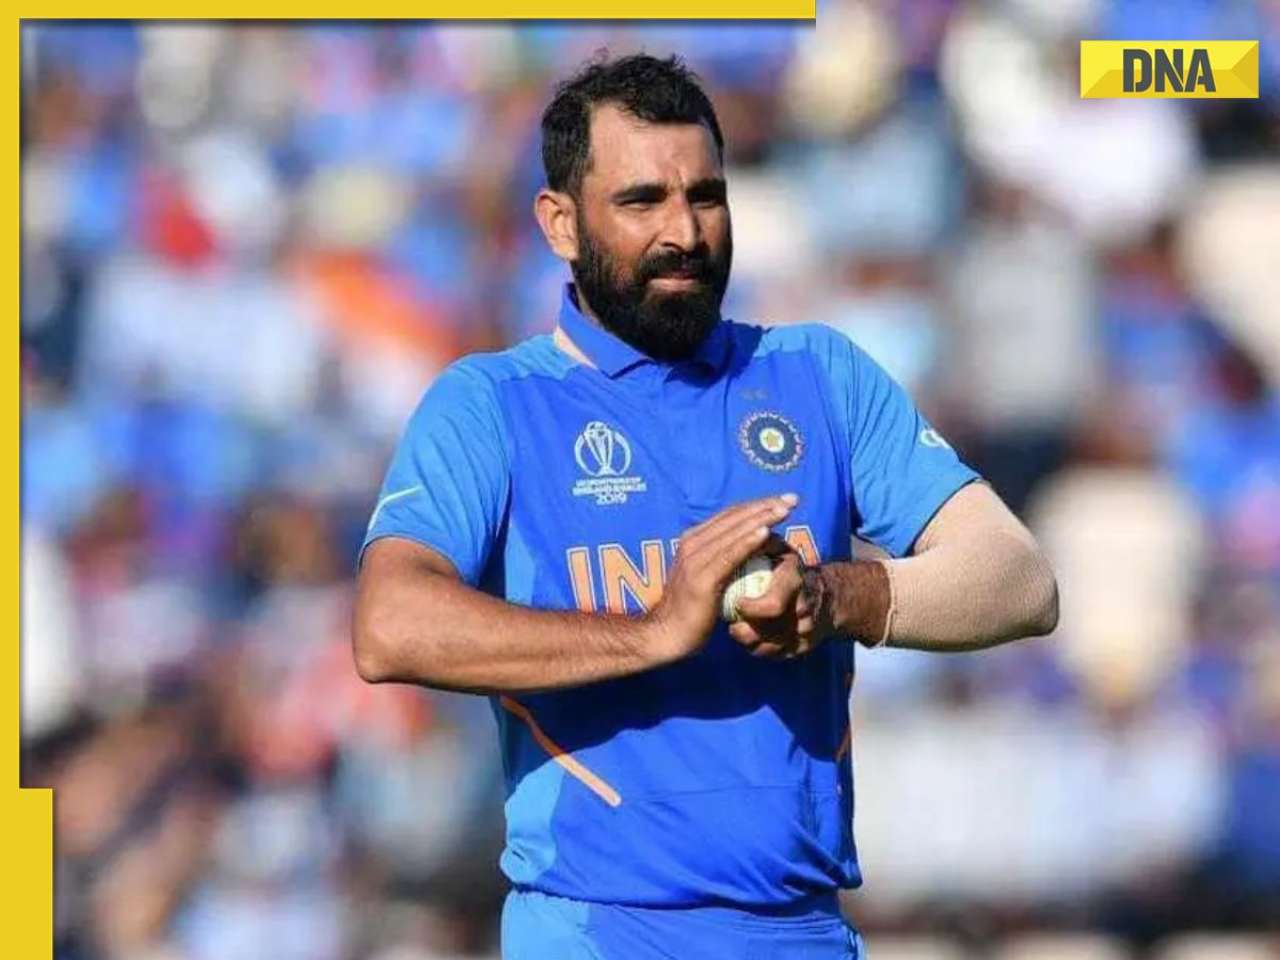 BJP may nominate star cricketer Mohammed Shami to contest Lok Sabha polls from West Bengal: Report